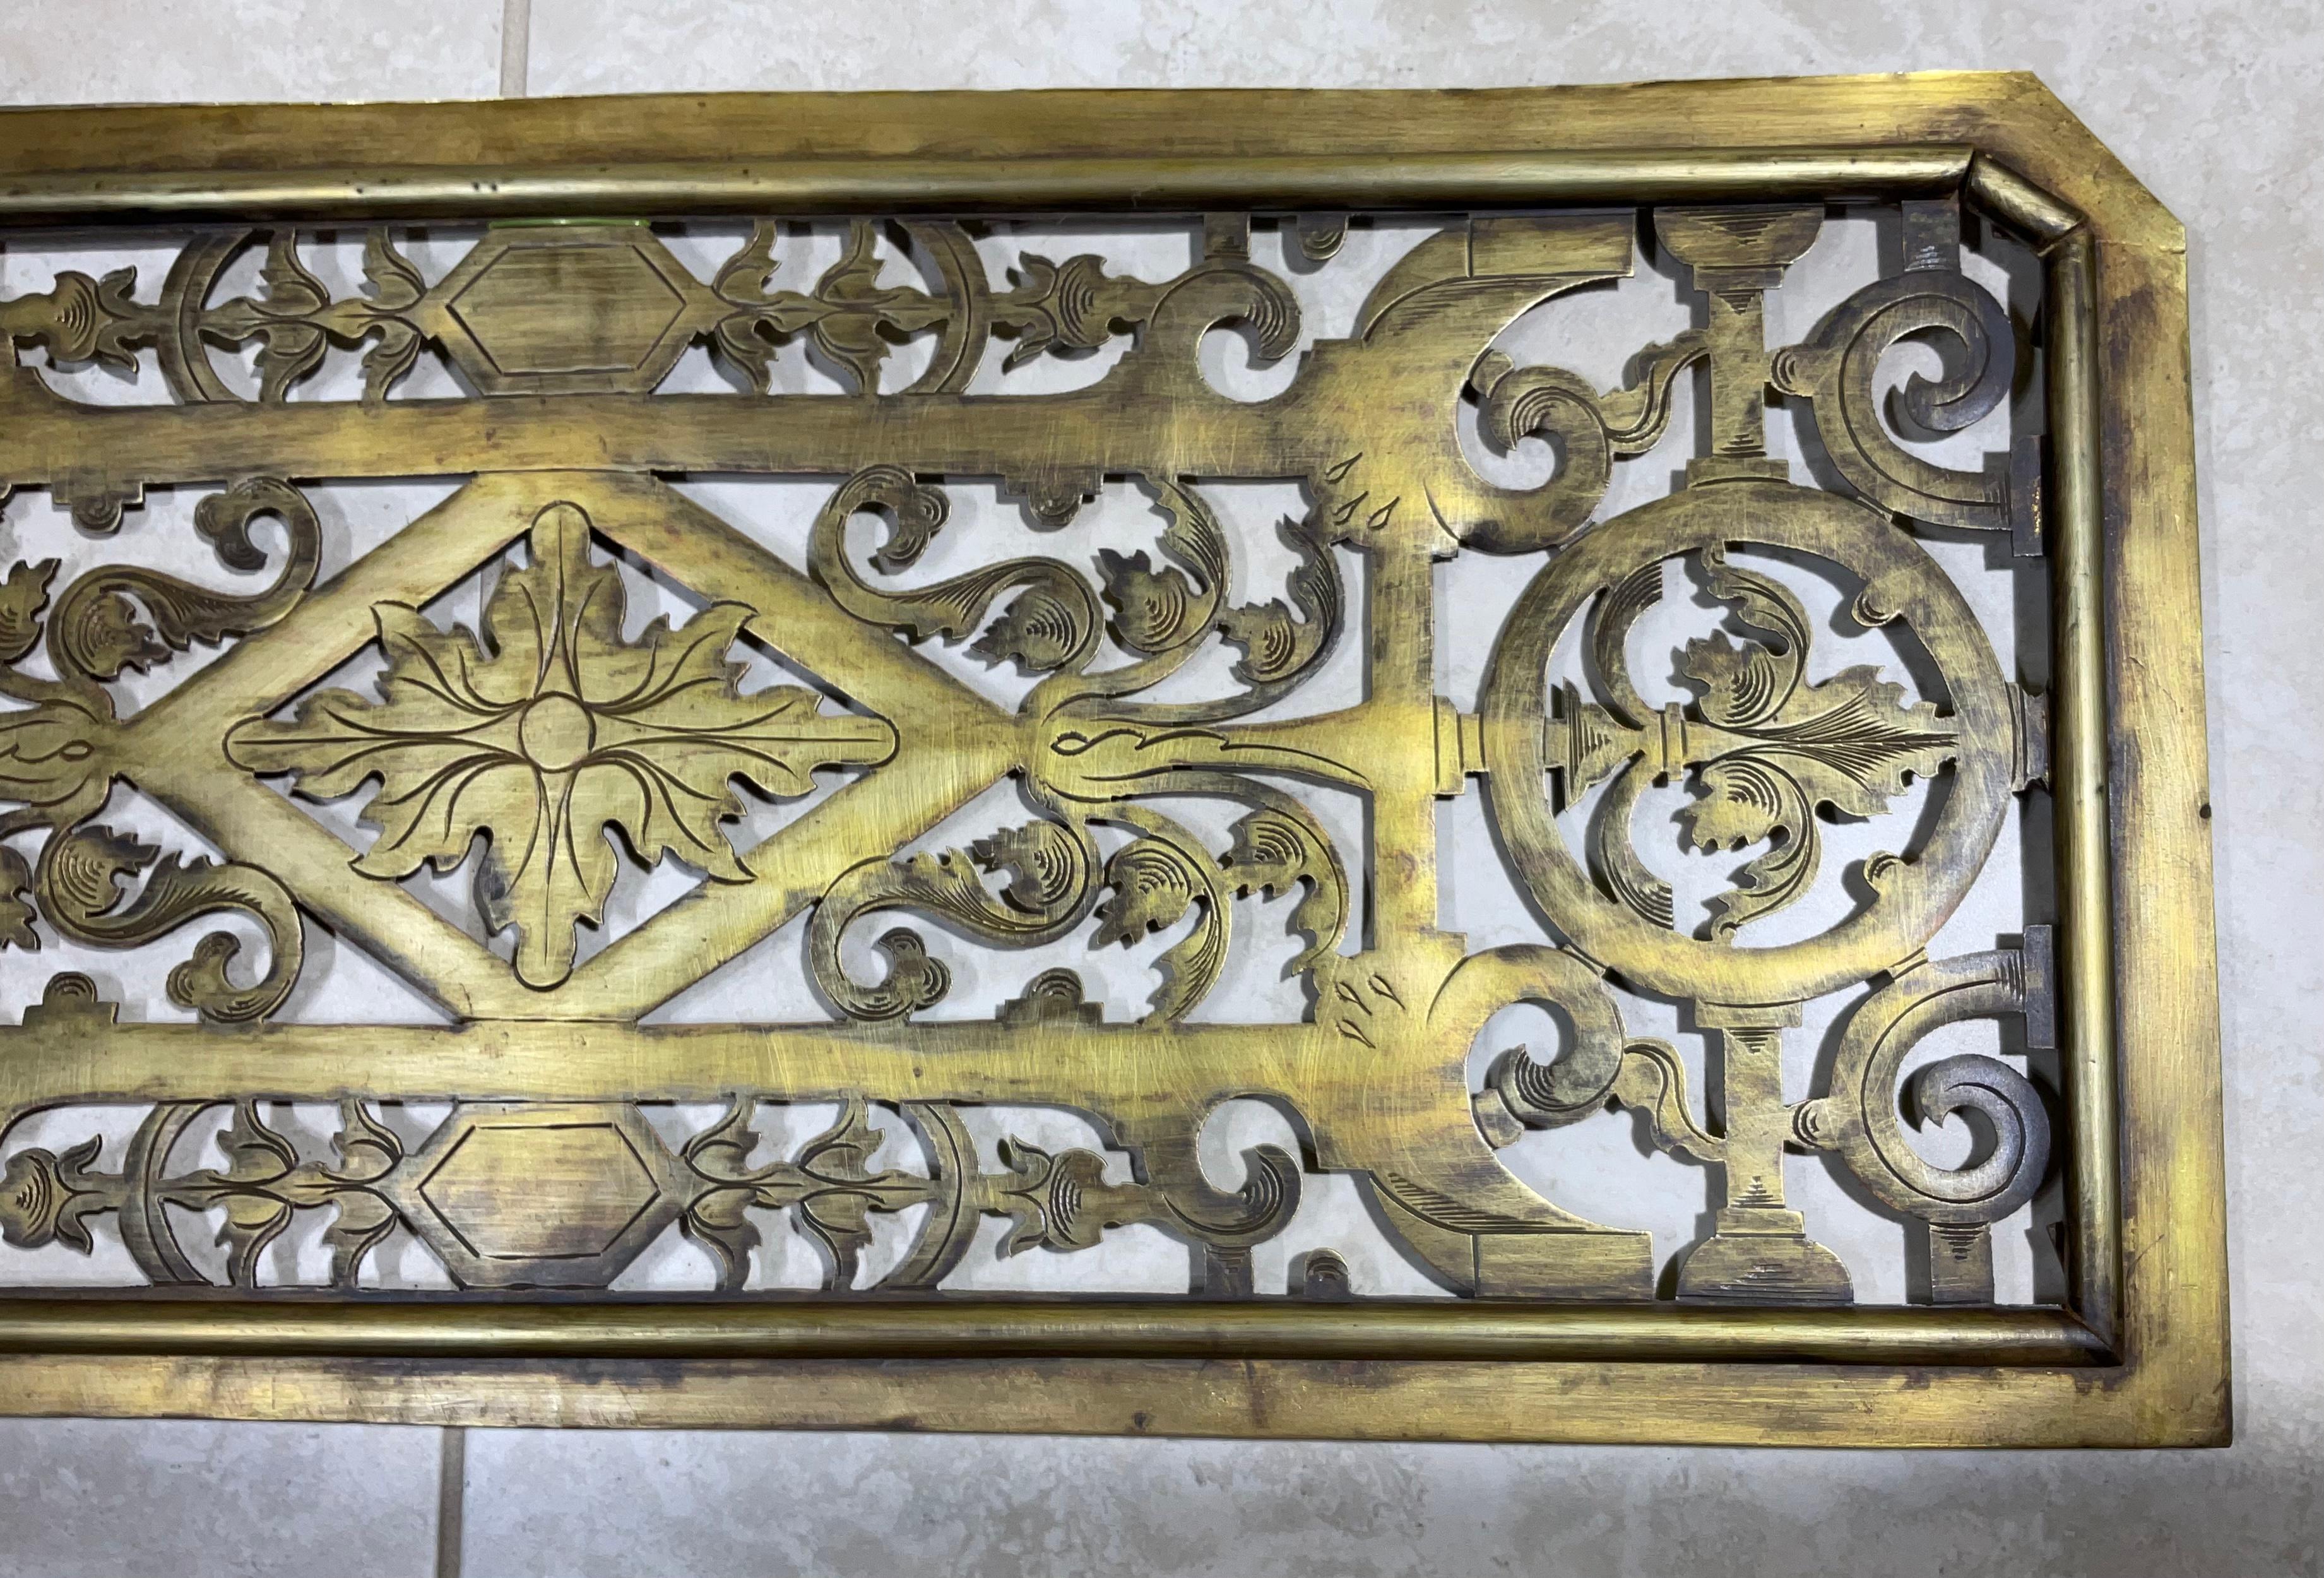 Three Piece 19th Century Brass Wall Hanging Ornament In Good Condition For Sale In Delray Beach, FL